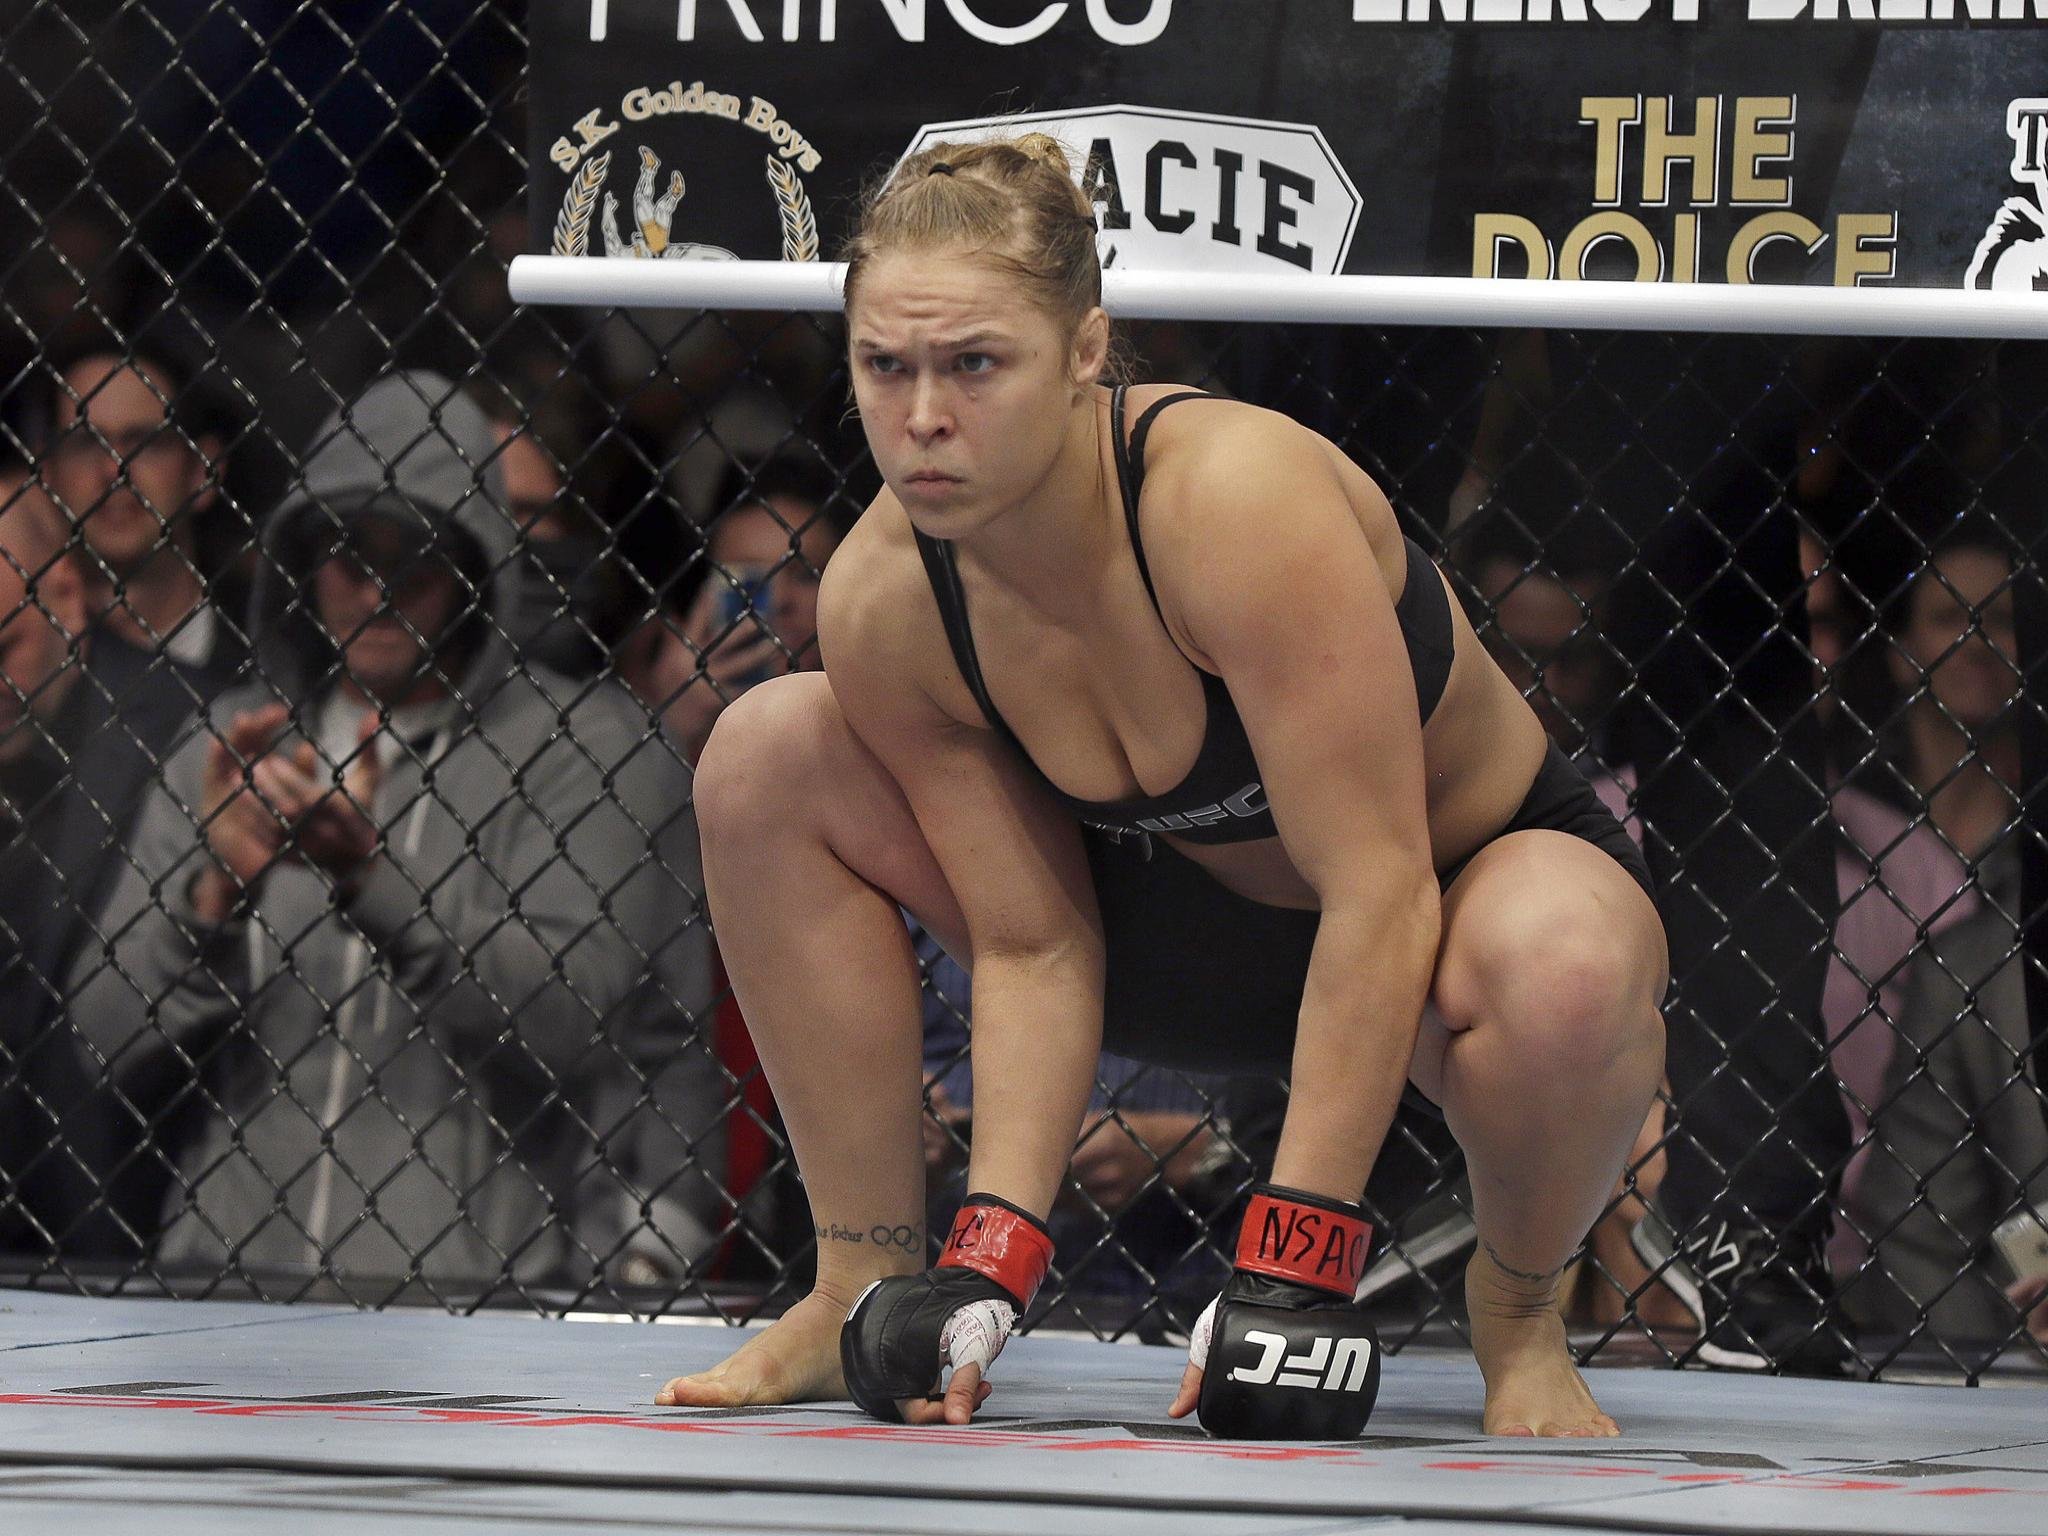 Awesome Ronda Rousey Free Wallpaper Id - Ronda Rousey Ufc Hot - HD Wallpaper 